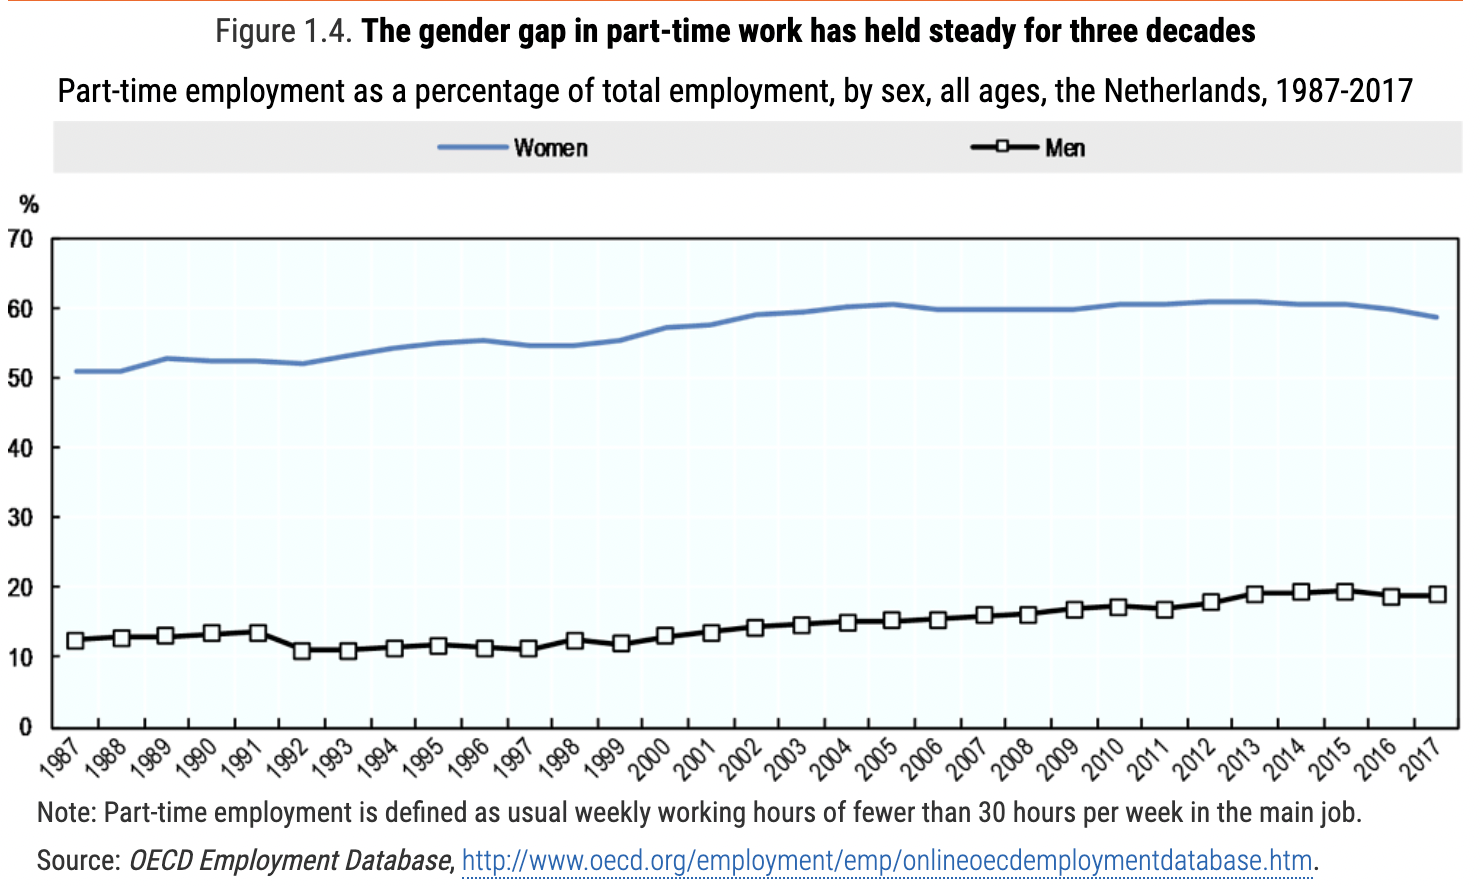 OECD line graph showing the gender gap in part-time work has held steady for three decades